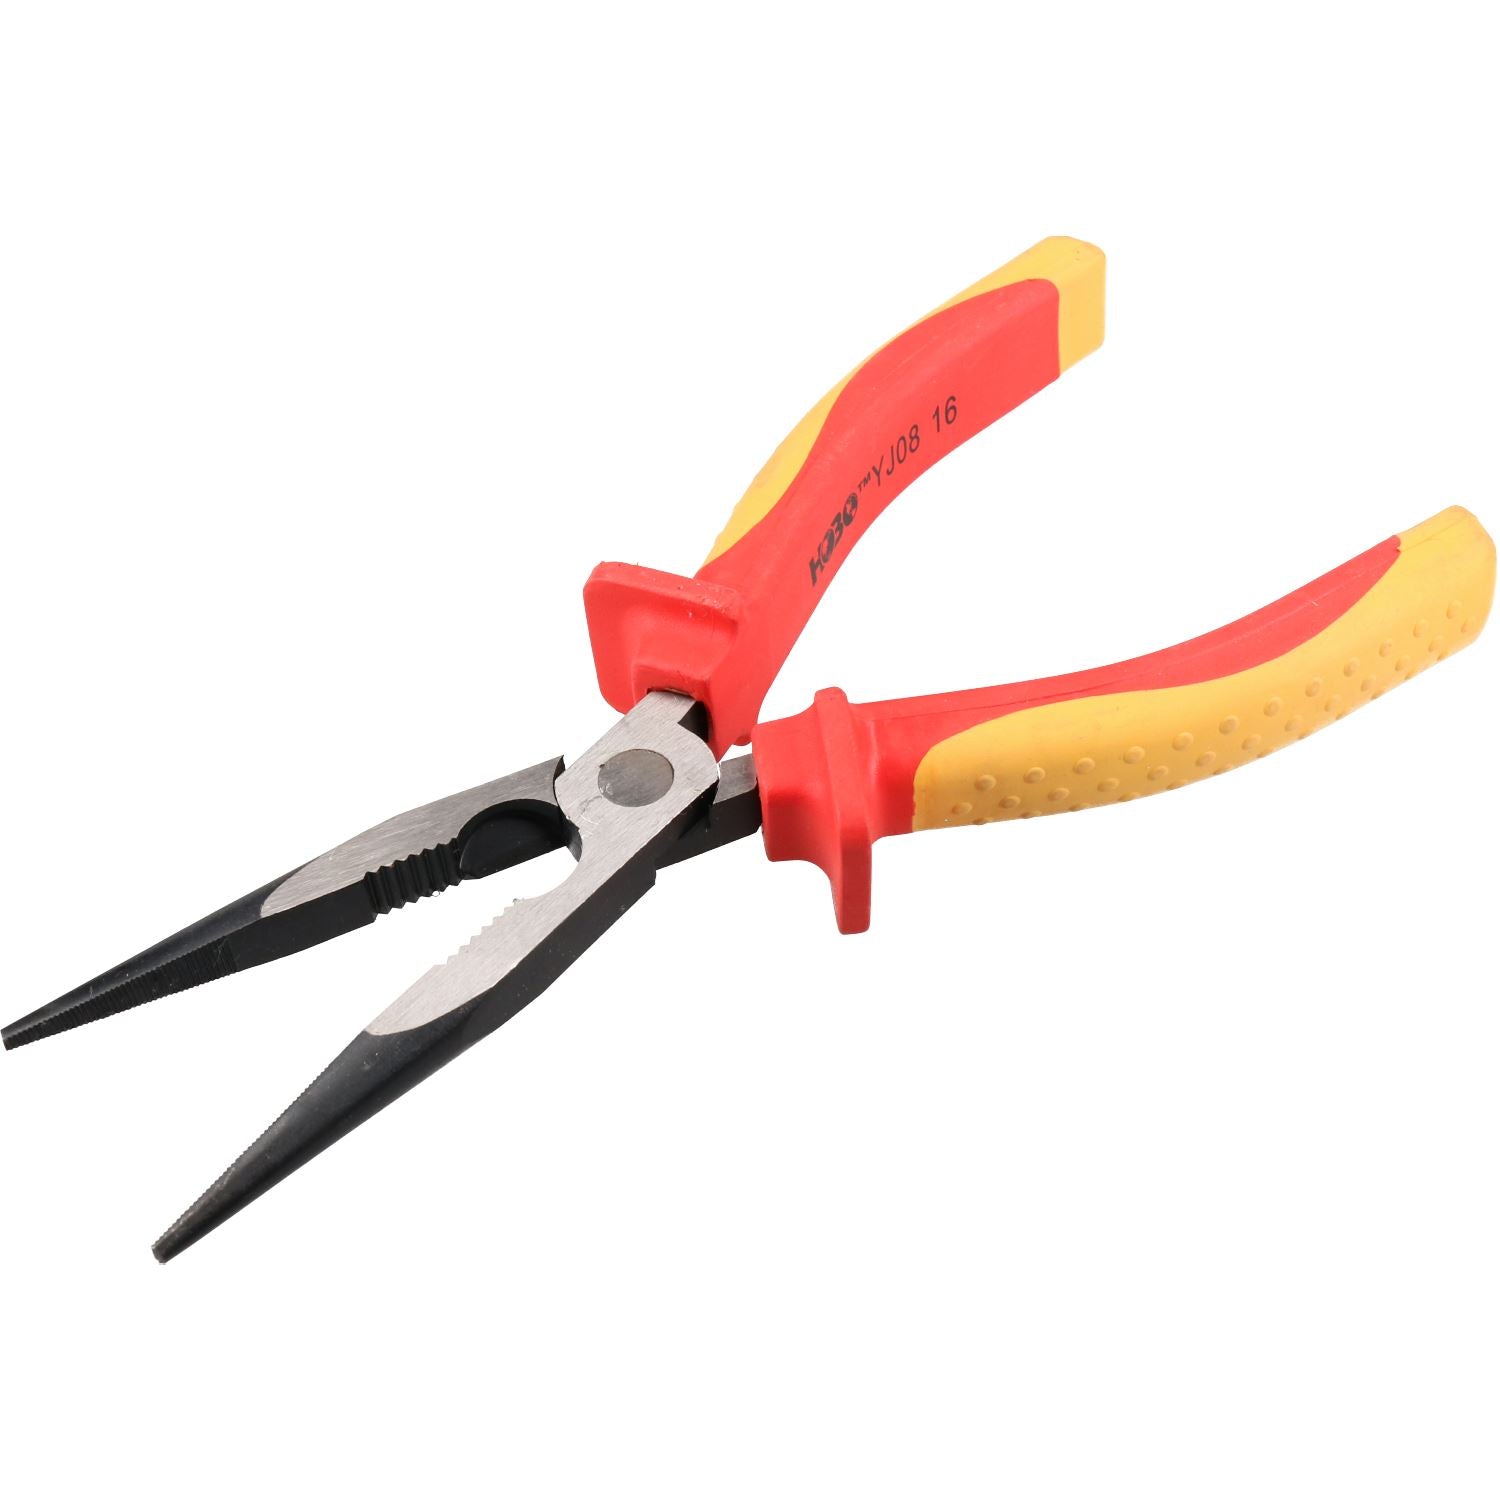 200mm 8 Inch VDE Insulated Long Nose Pliers Electricians Electrical Hybrid Use